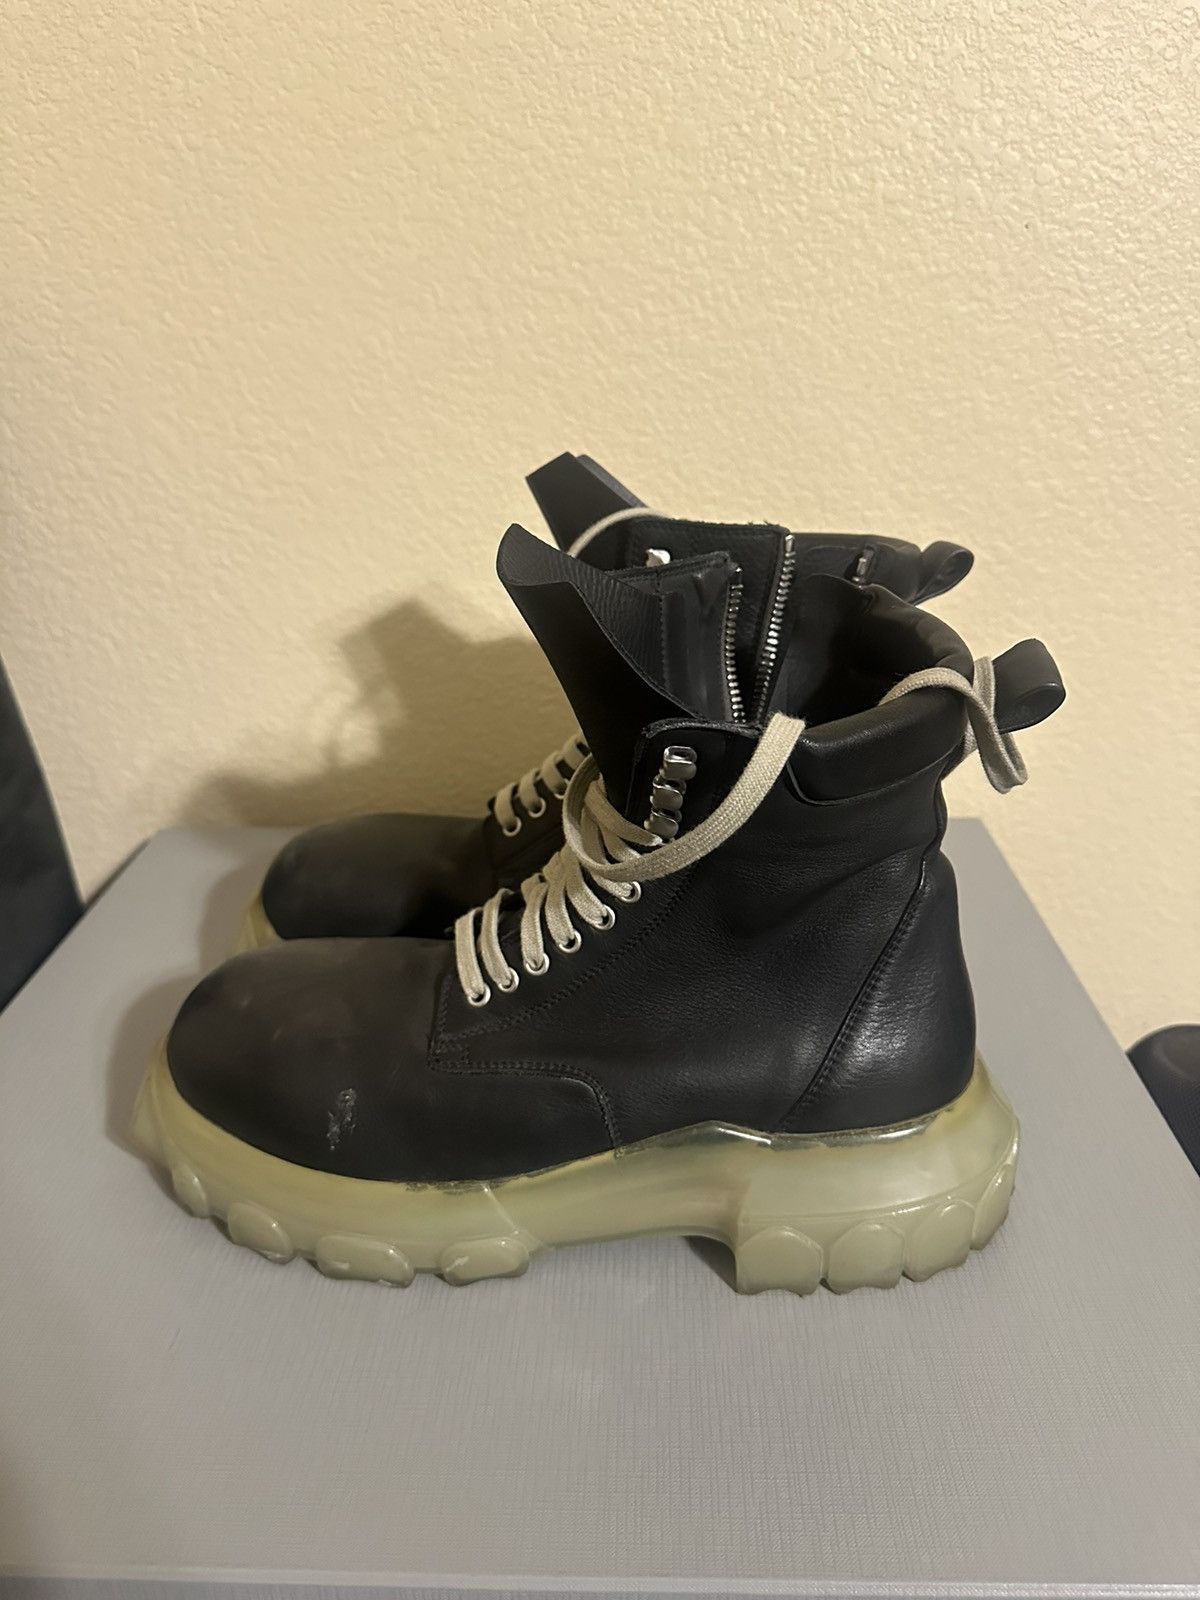 Rick Owens Rick Owens Army Tractor Lace Up Boots Size 43/10 | Grailed